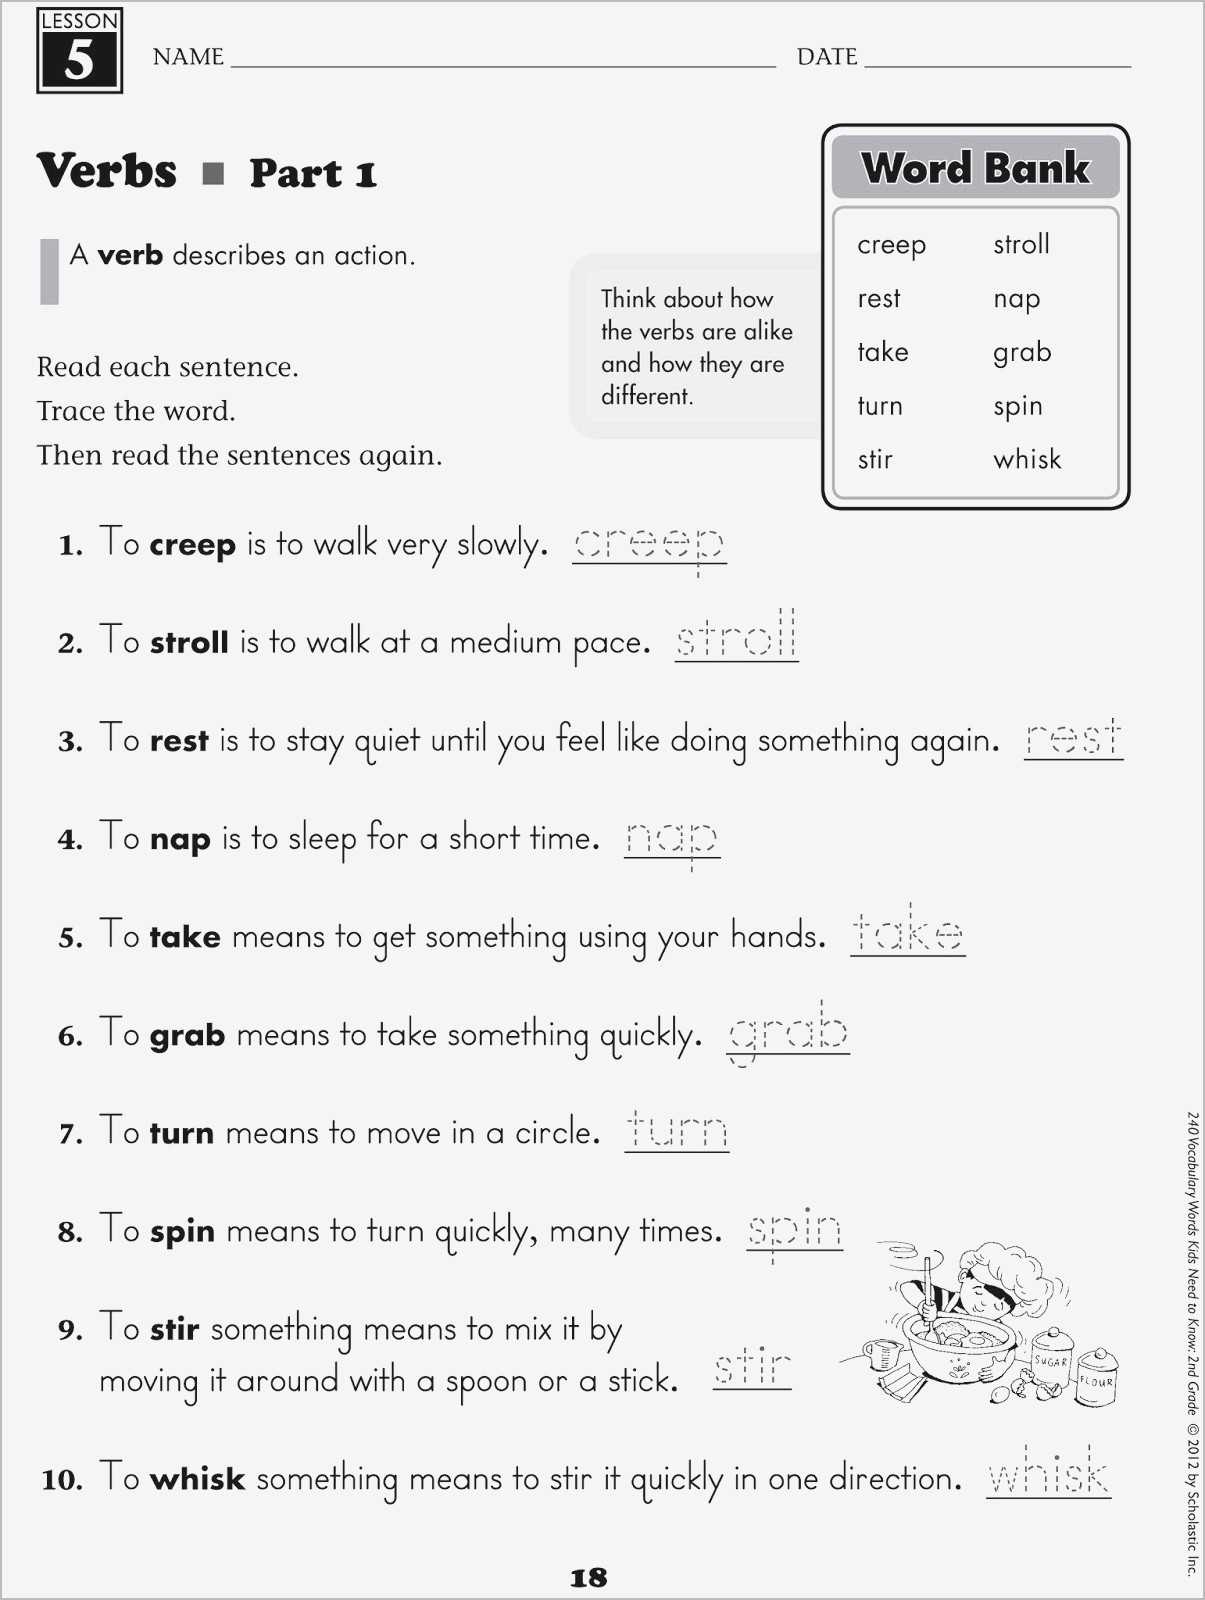 Self Esteem and Self Worth Worksheets Also Subject Verb Agreement Worksheets Ideas